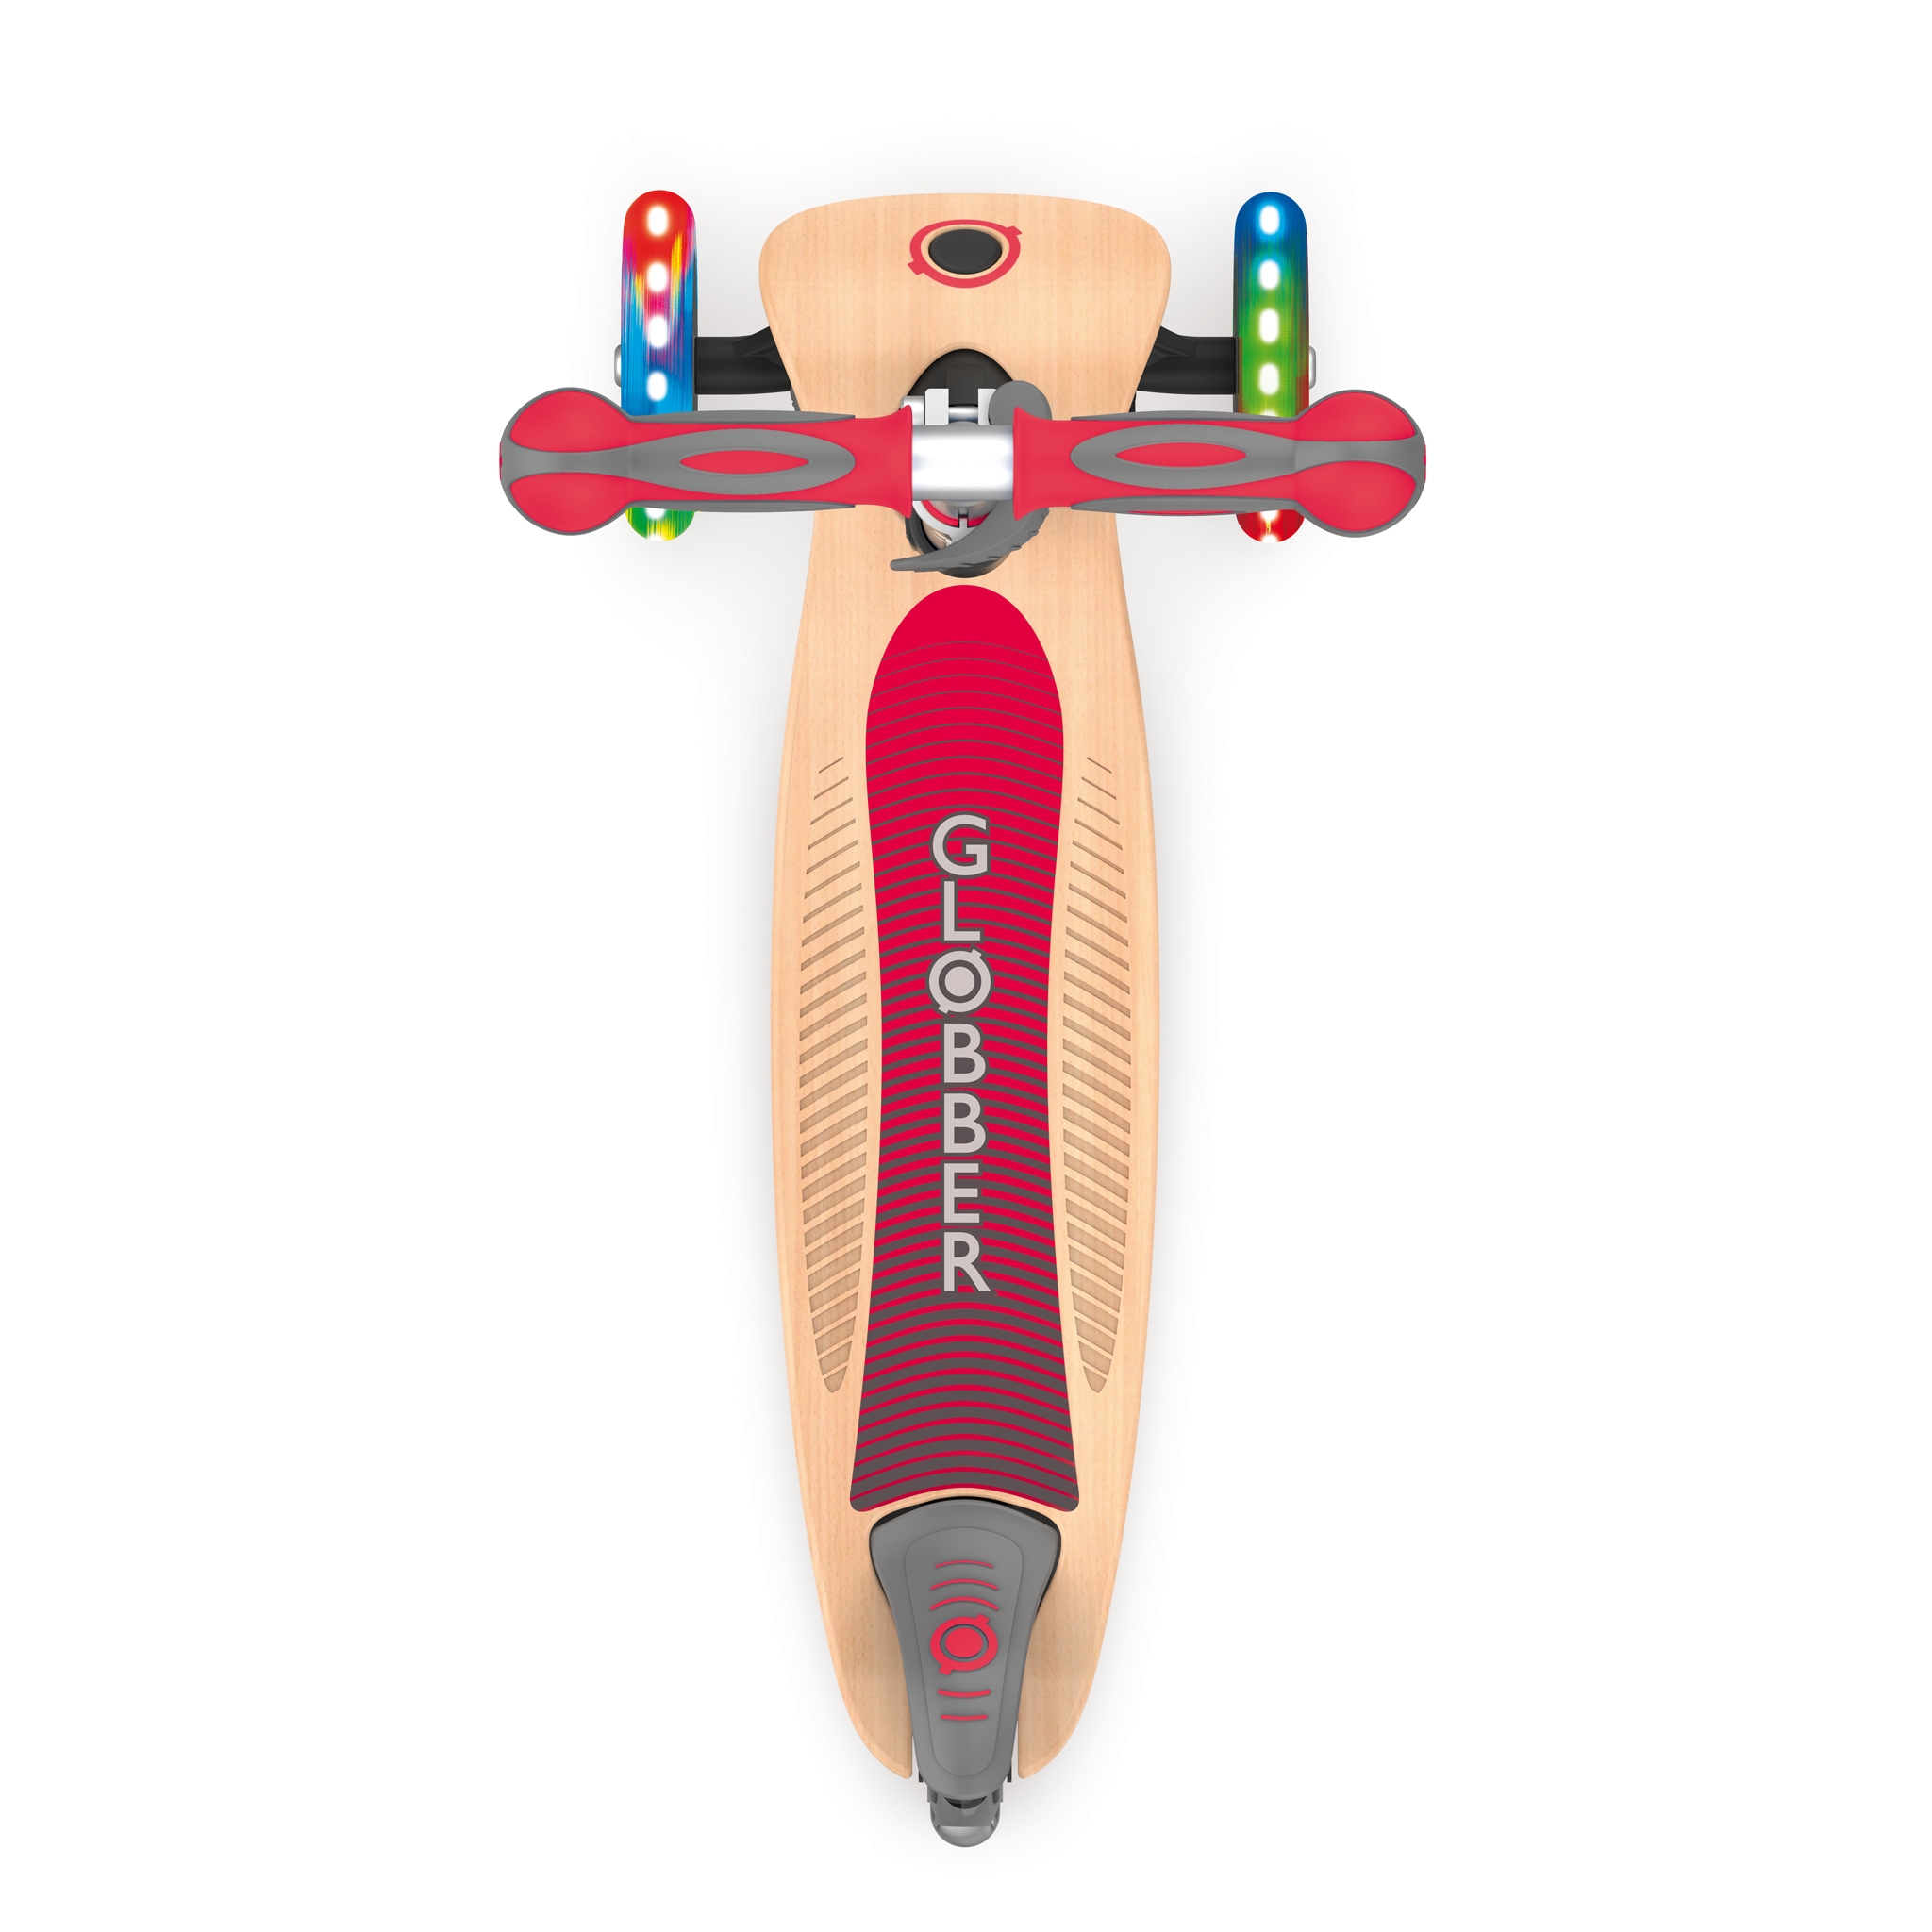 PRIMO-FOLDABLE-WOOD-LIGHTS-3-wheel-with-7-ply-wooden-scooter-deck-and-laser-engraved-sides-on-the-deck_new-red 3